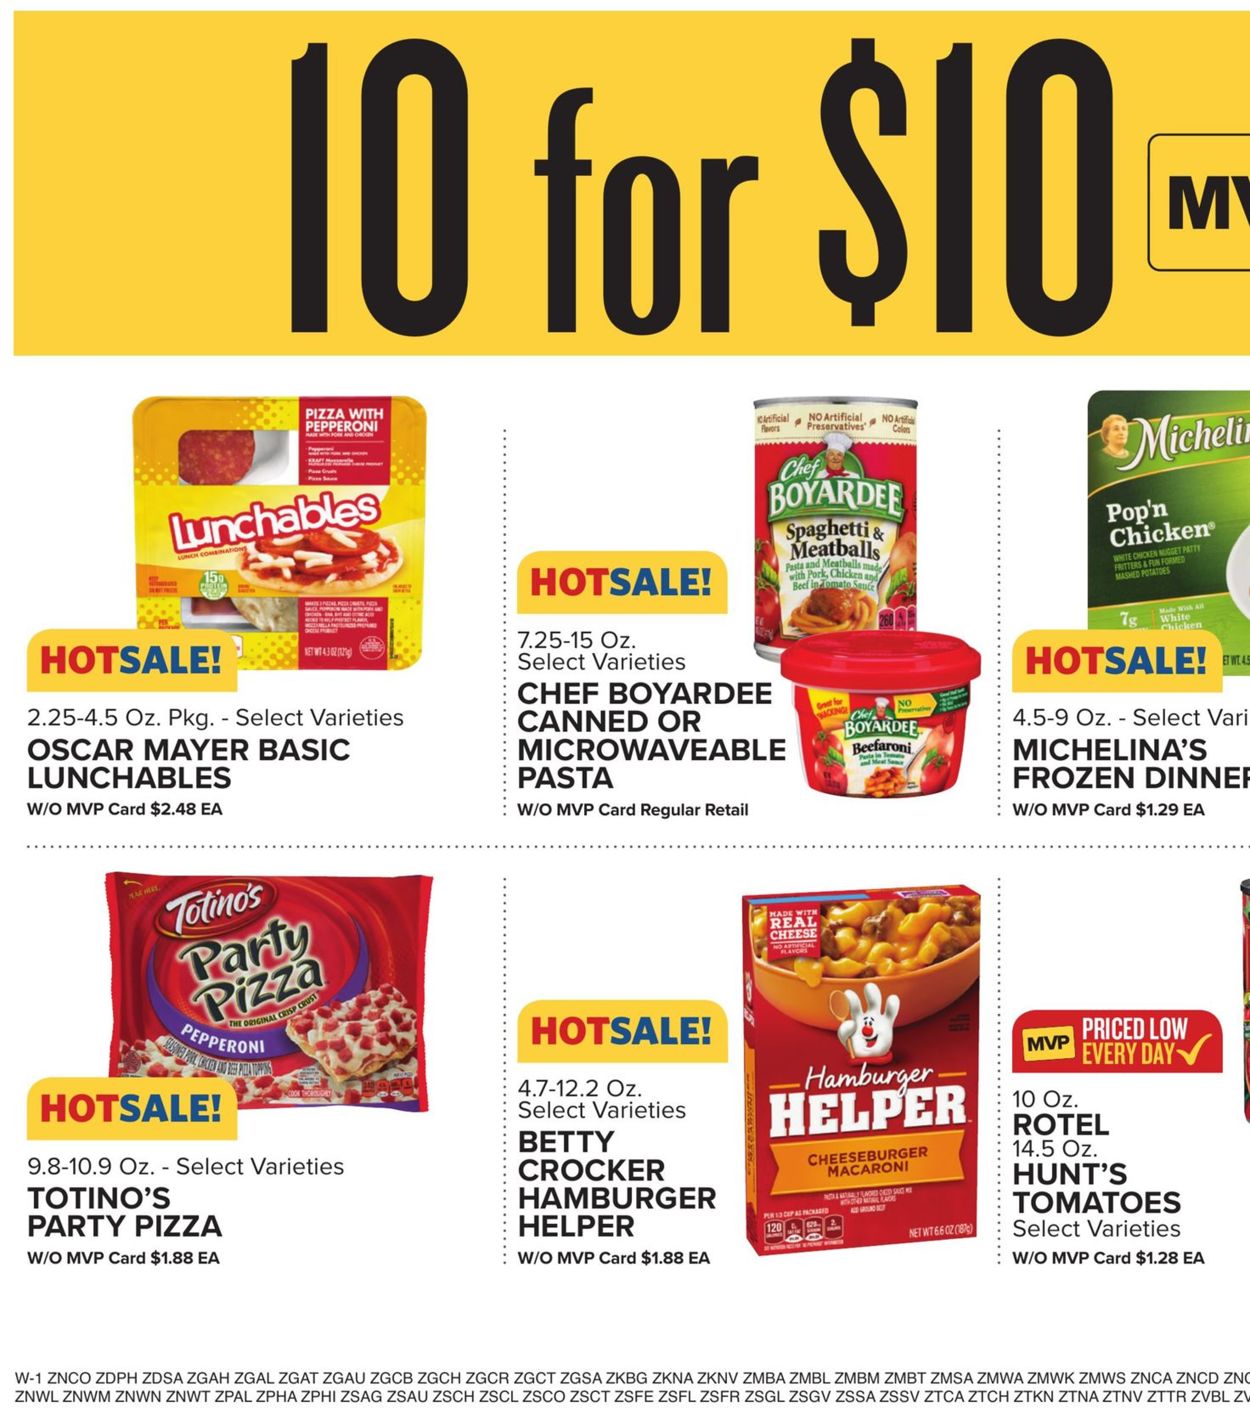 Food Lion Current weekly ad 10/02 - 10/08/2019 [11] - frequent-ads.com